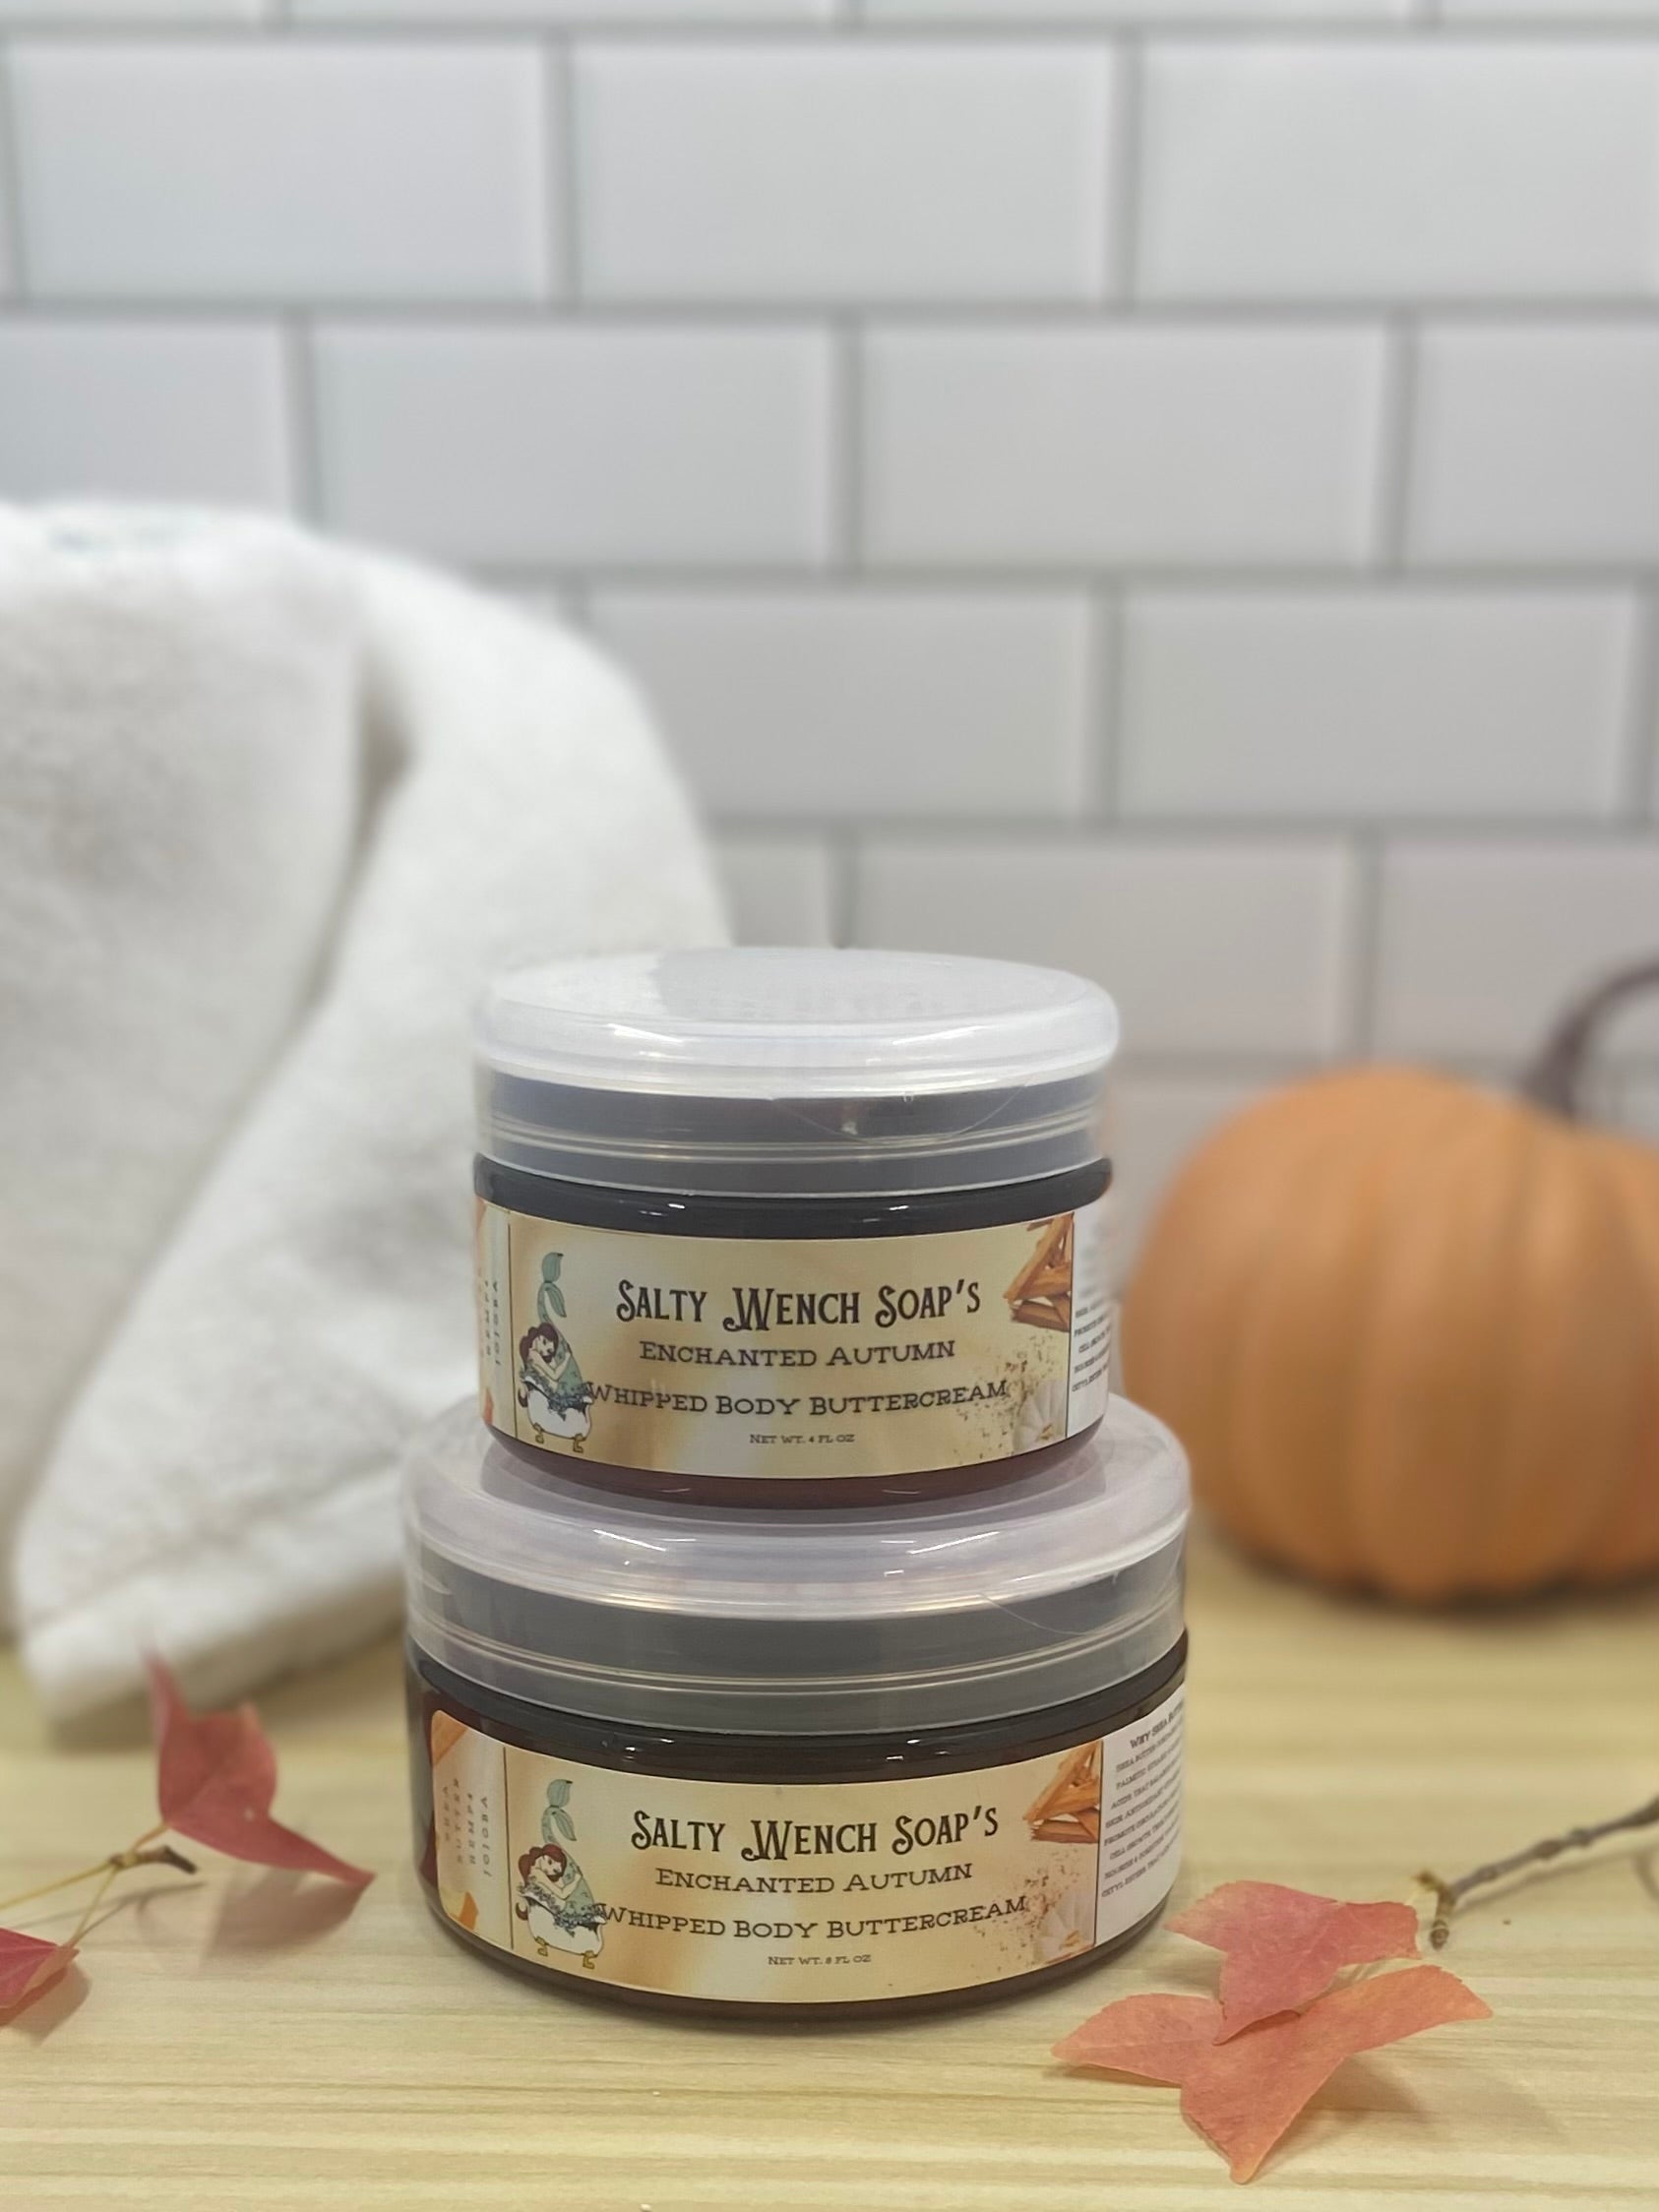 Enchanted Autumn (previously known as Pumpkin Sandalwood) Whipped